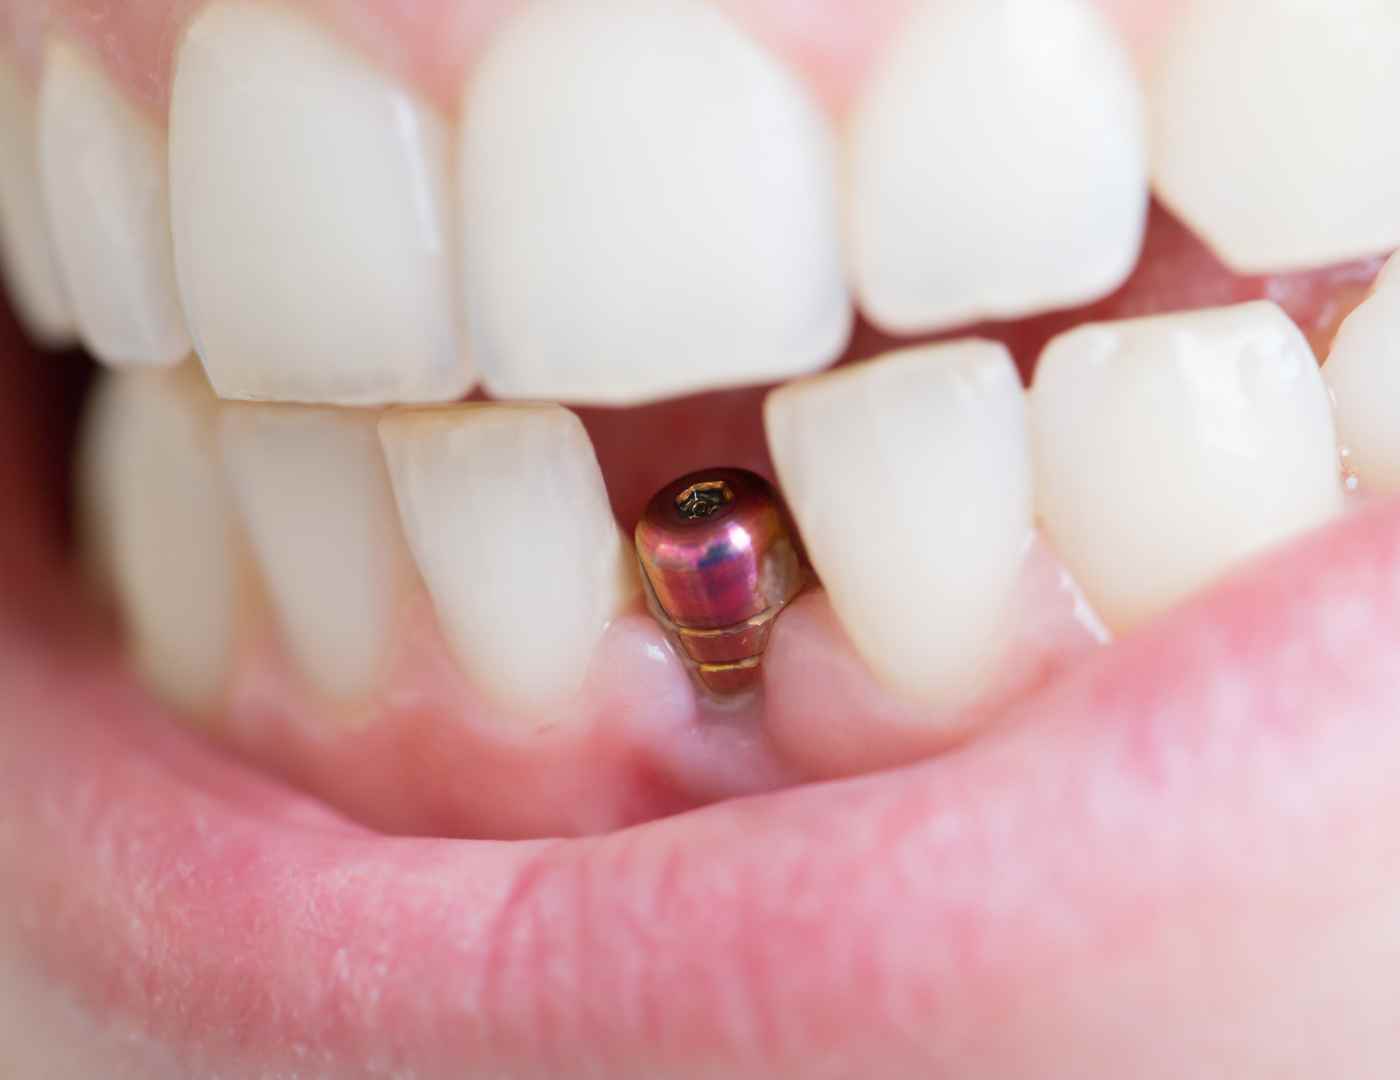 Dental Implant for Front Tooth